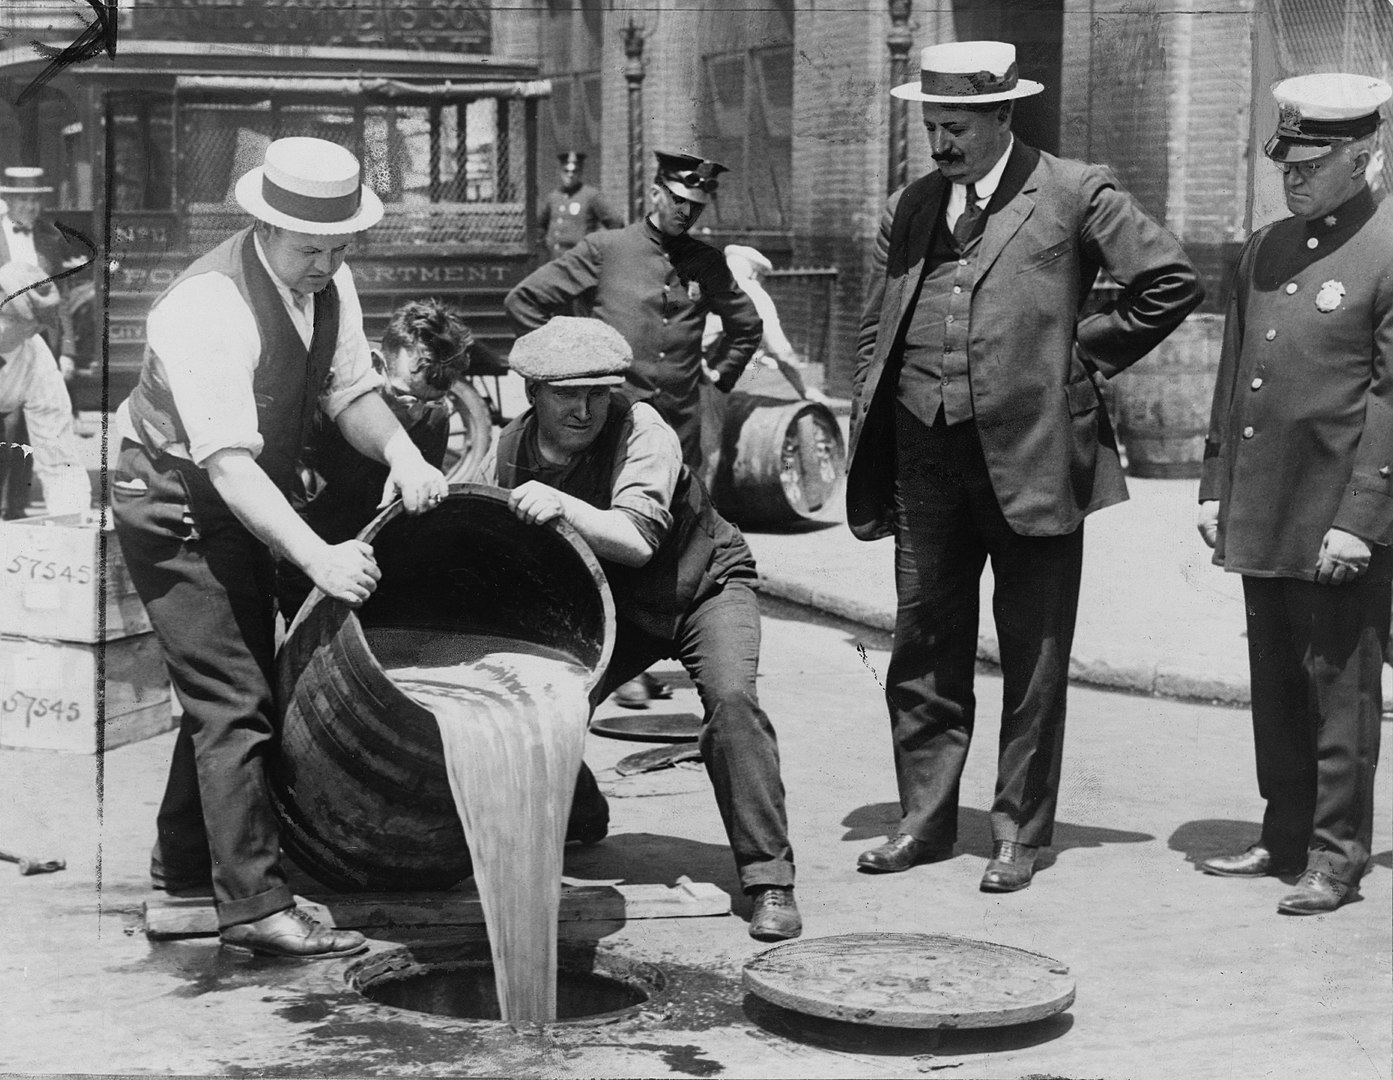 New York Police Commissioner Oversees A Liquor Pouring Exercise After A Successful Raid At The Height Of Prohibition Era  